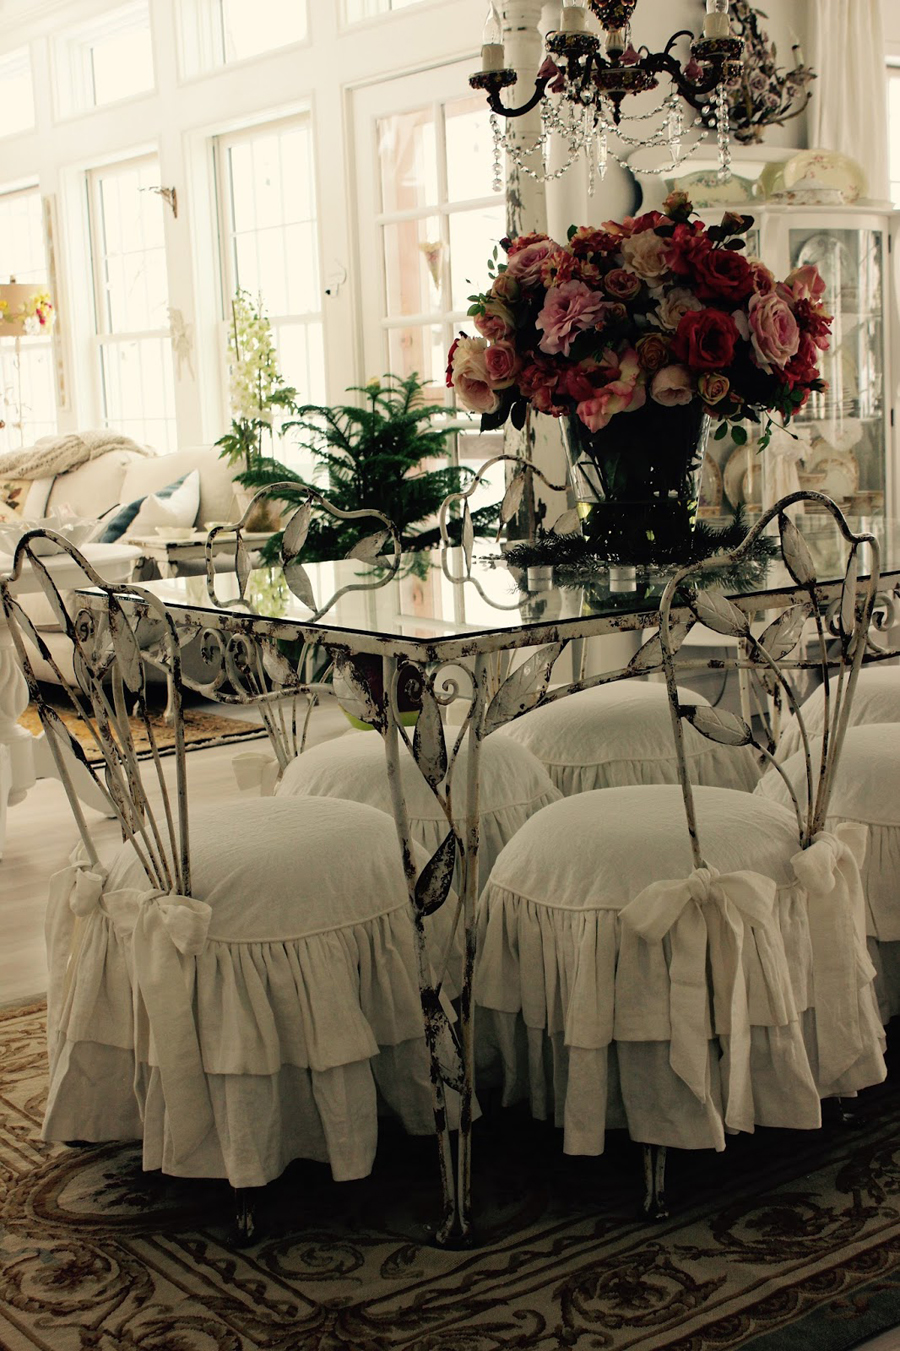 such pretty and romantic slipcovers - 1 of 8 picks for this week's Friday Favorites